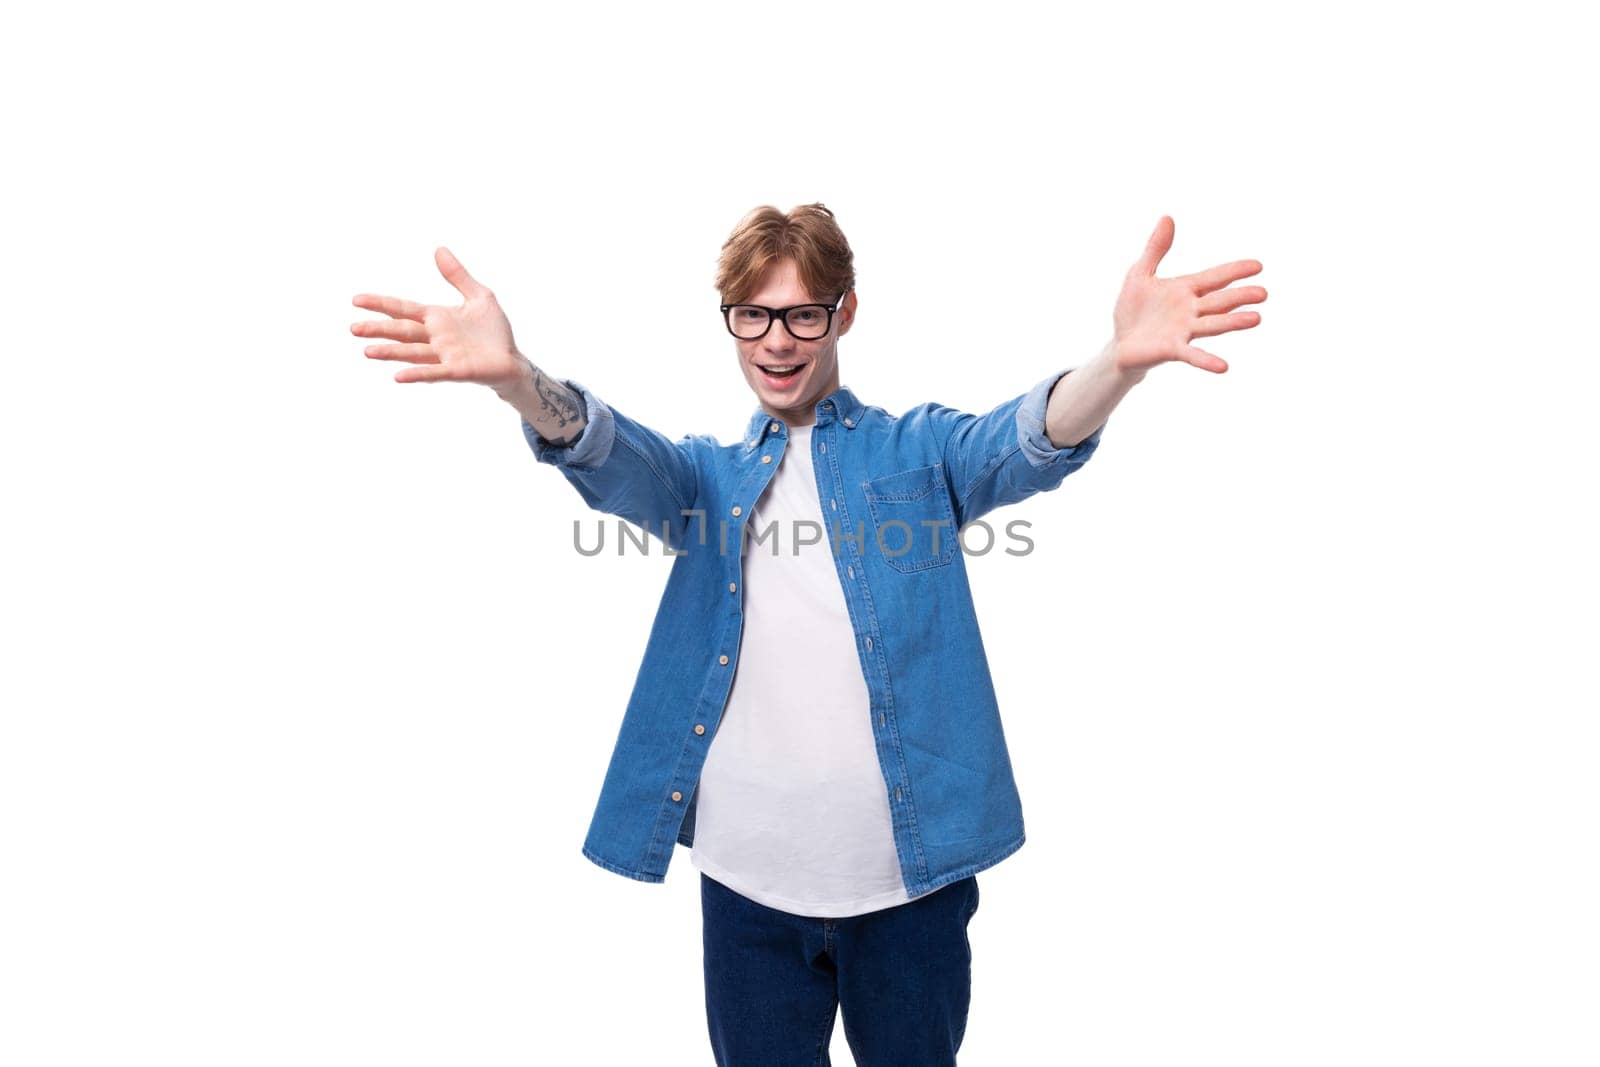 young joyful surprised red-haired guy dressed in a blue shirt wears glasses on a white background with copy space.